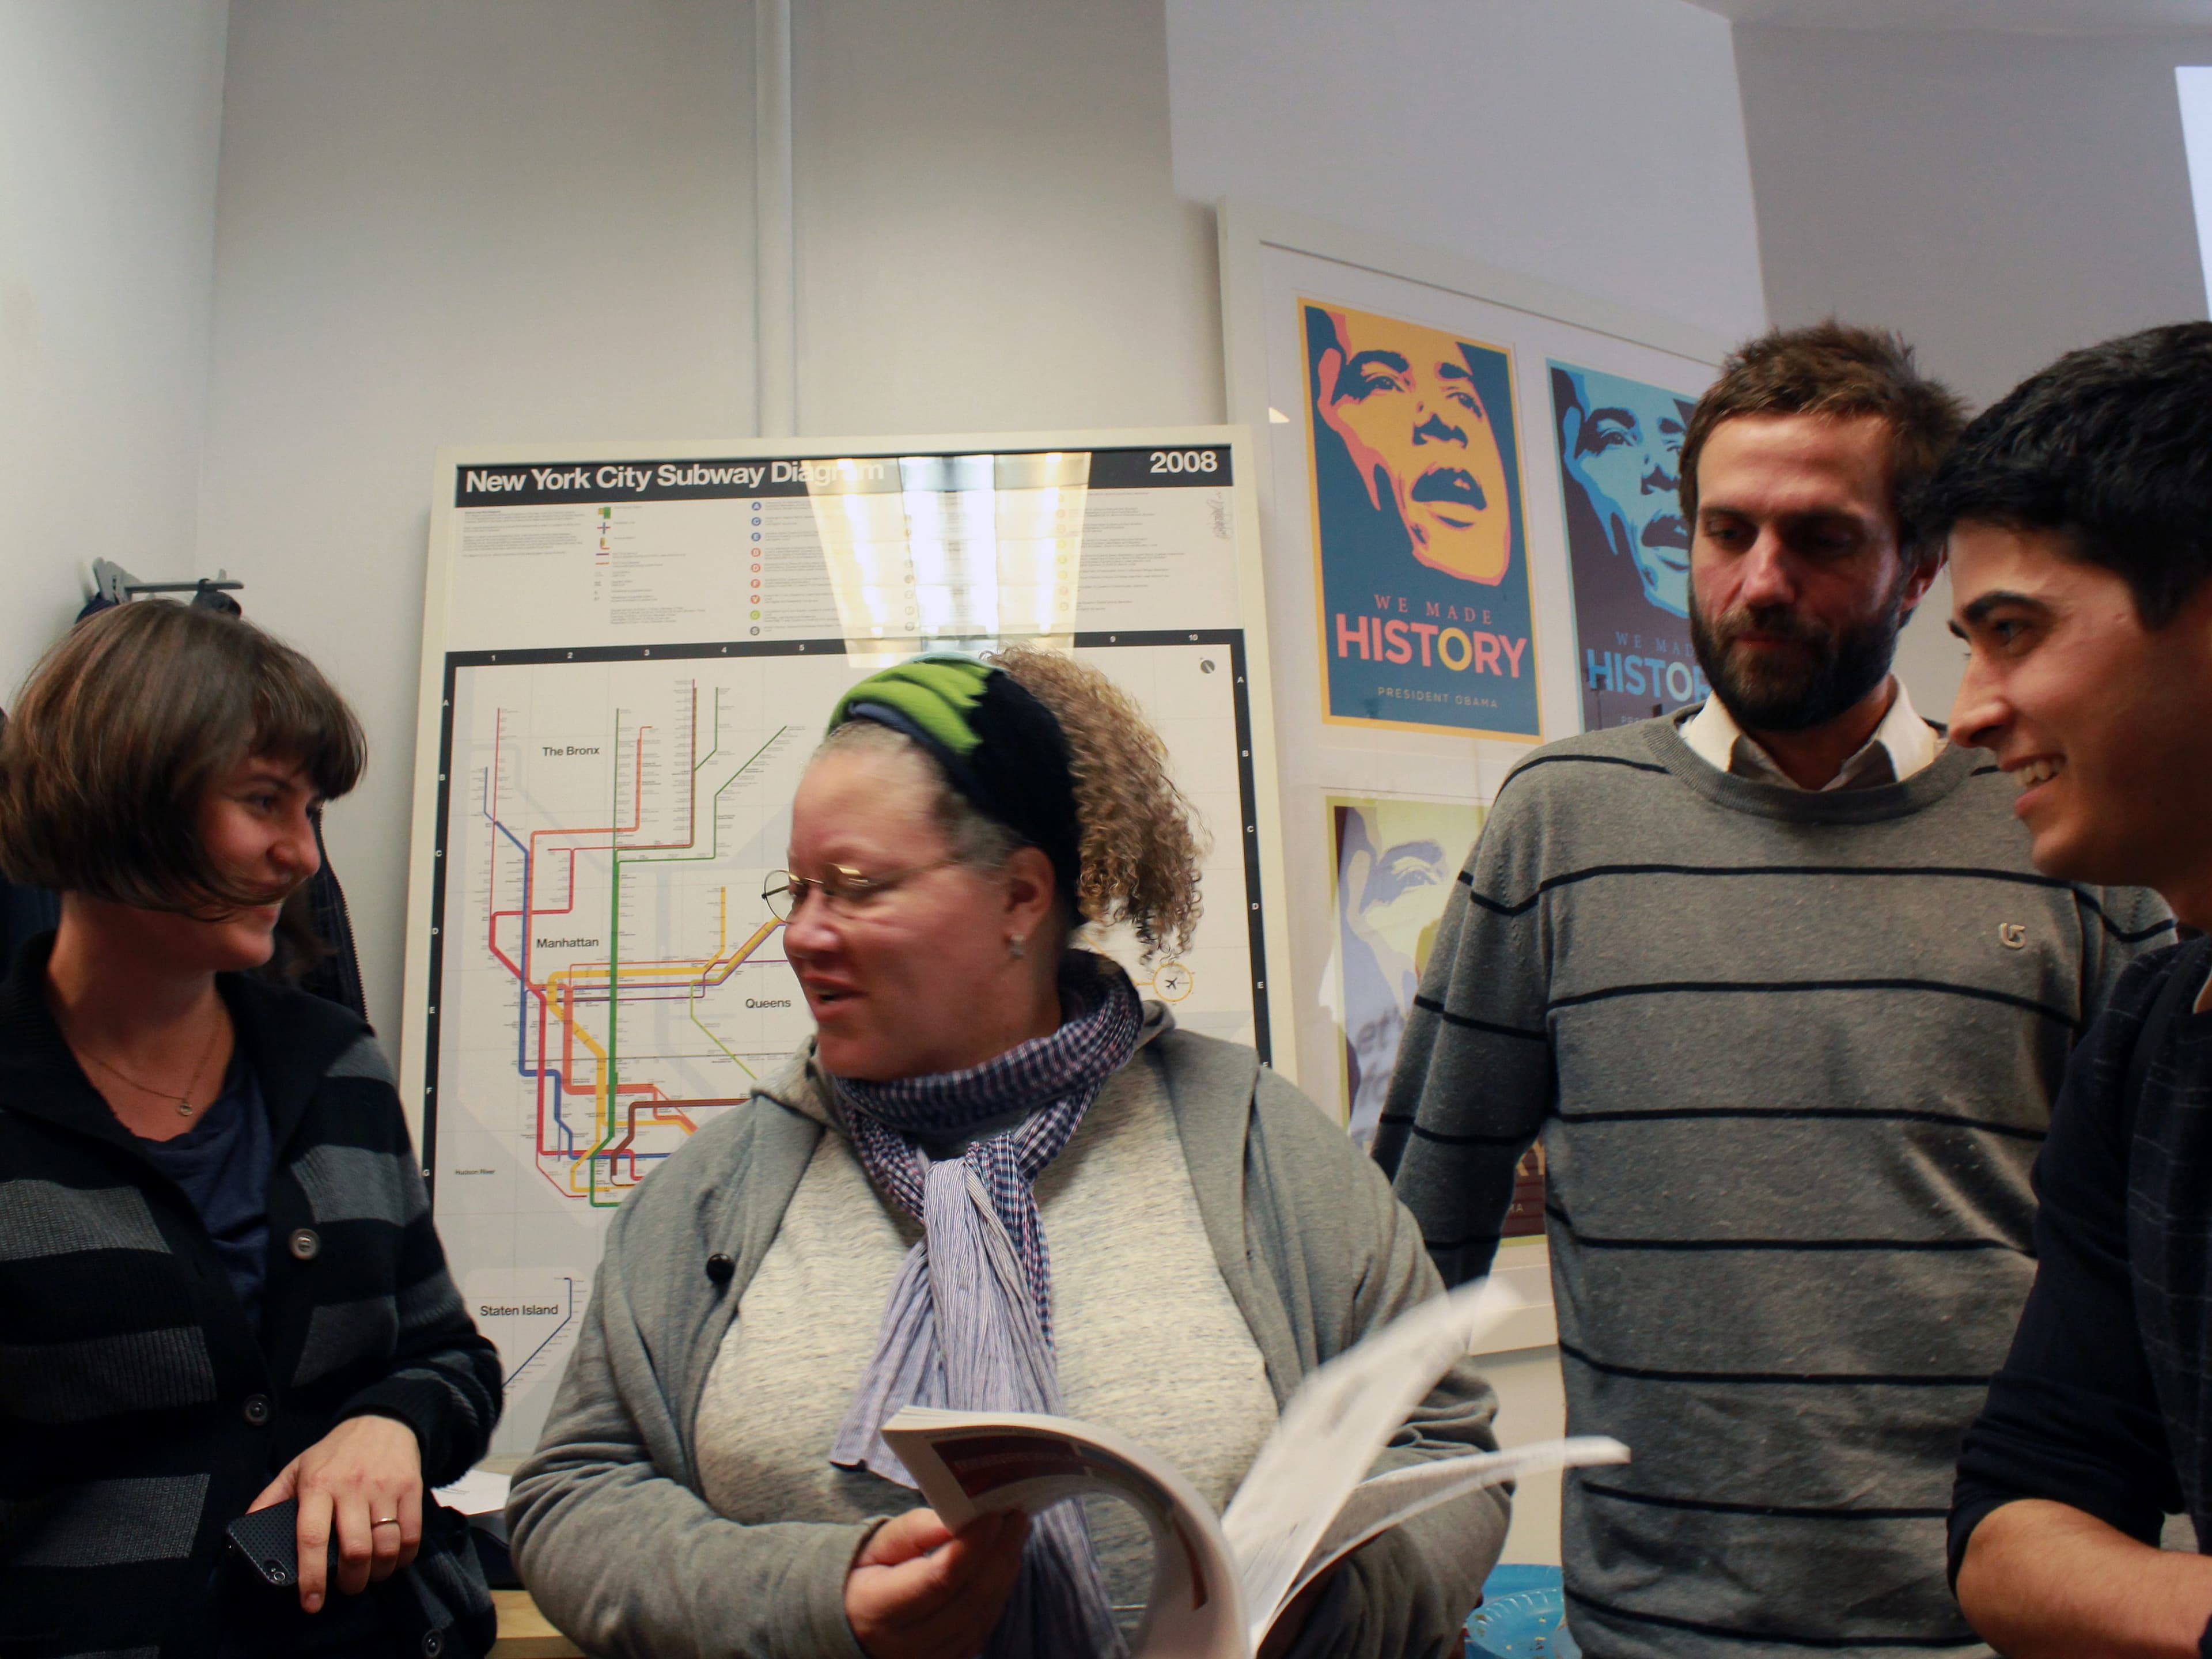 Four people are standing in a room engaged in conversation. One person is holding a book or magazine. A New York City Subway map and posters with bold designs are visible on the wall behind them. They appear to be in an office or informal setting.